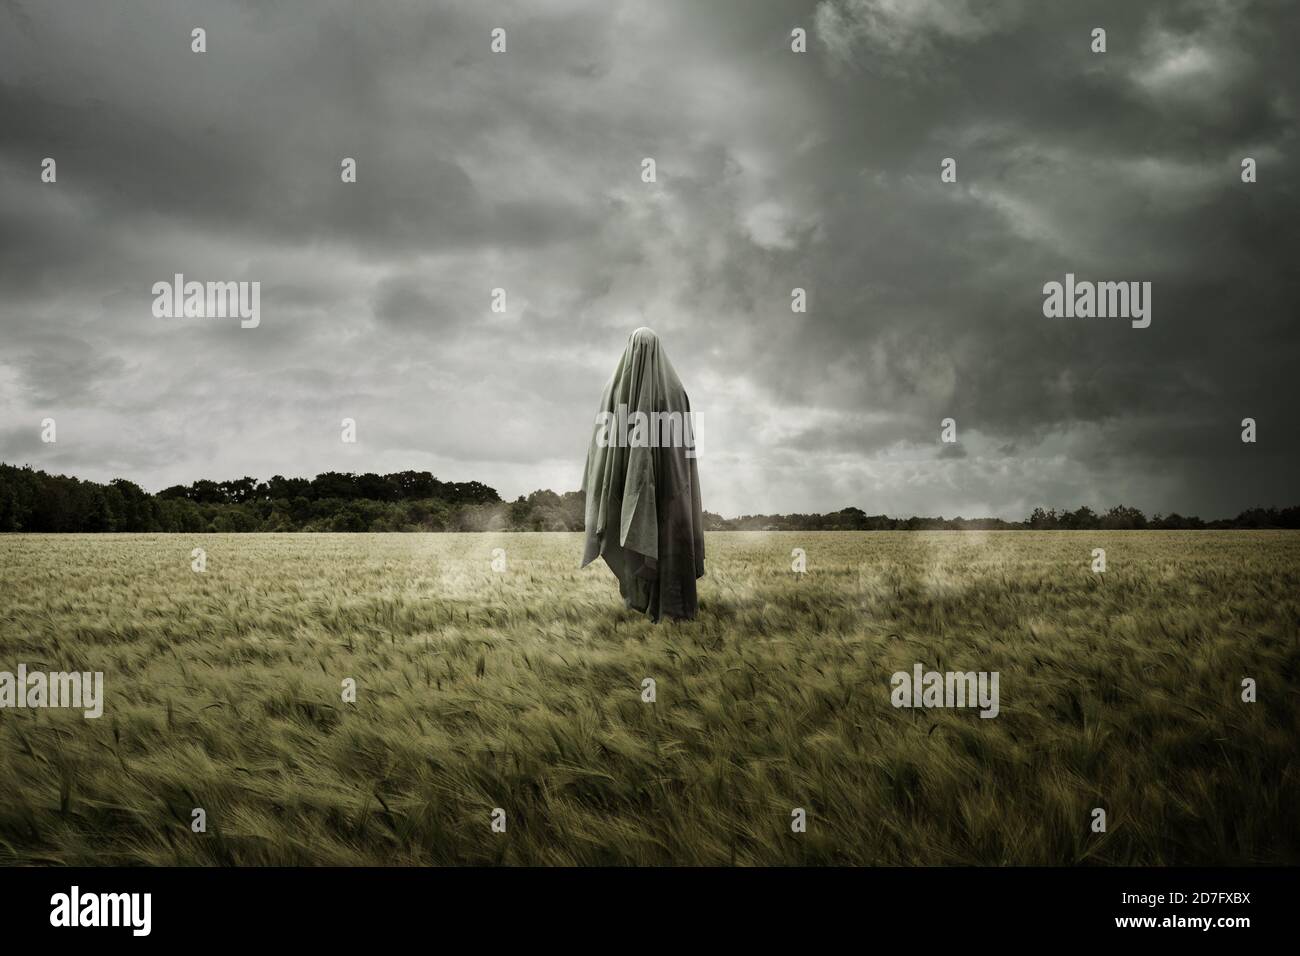 Haunted and bleak landscape with a floating spirit ghost, Disturbing concept. Stock Photo